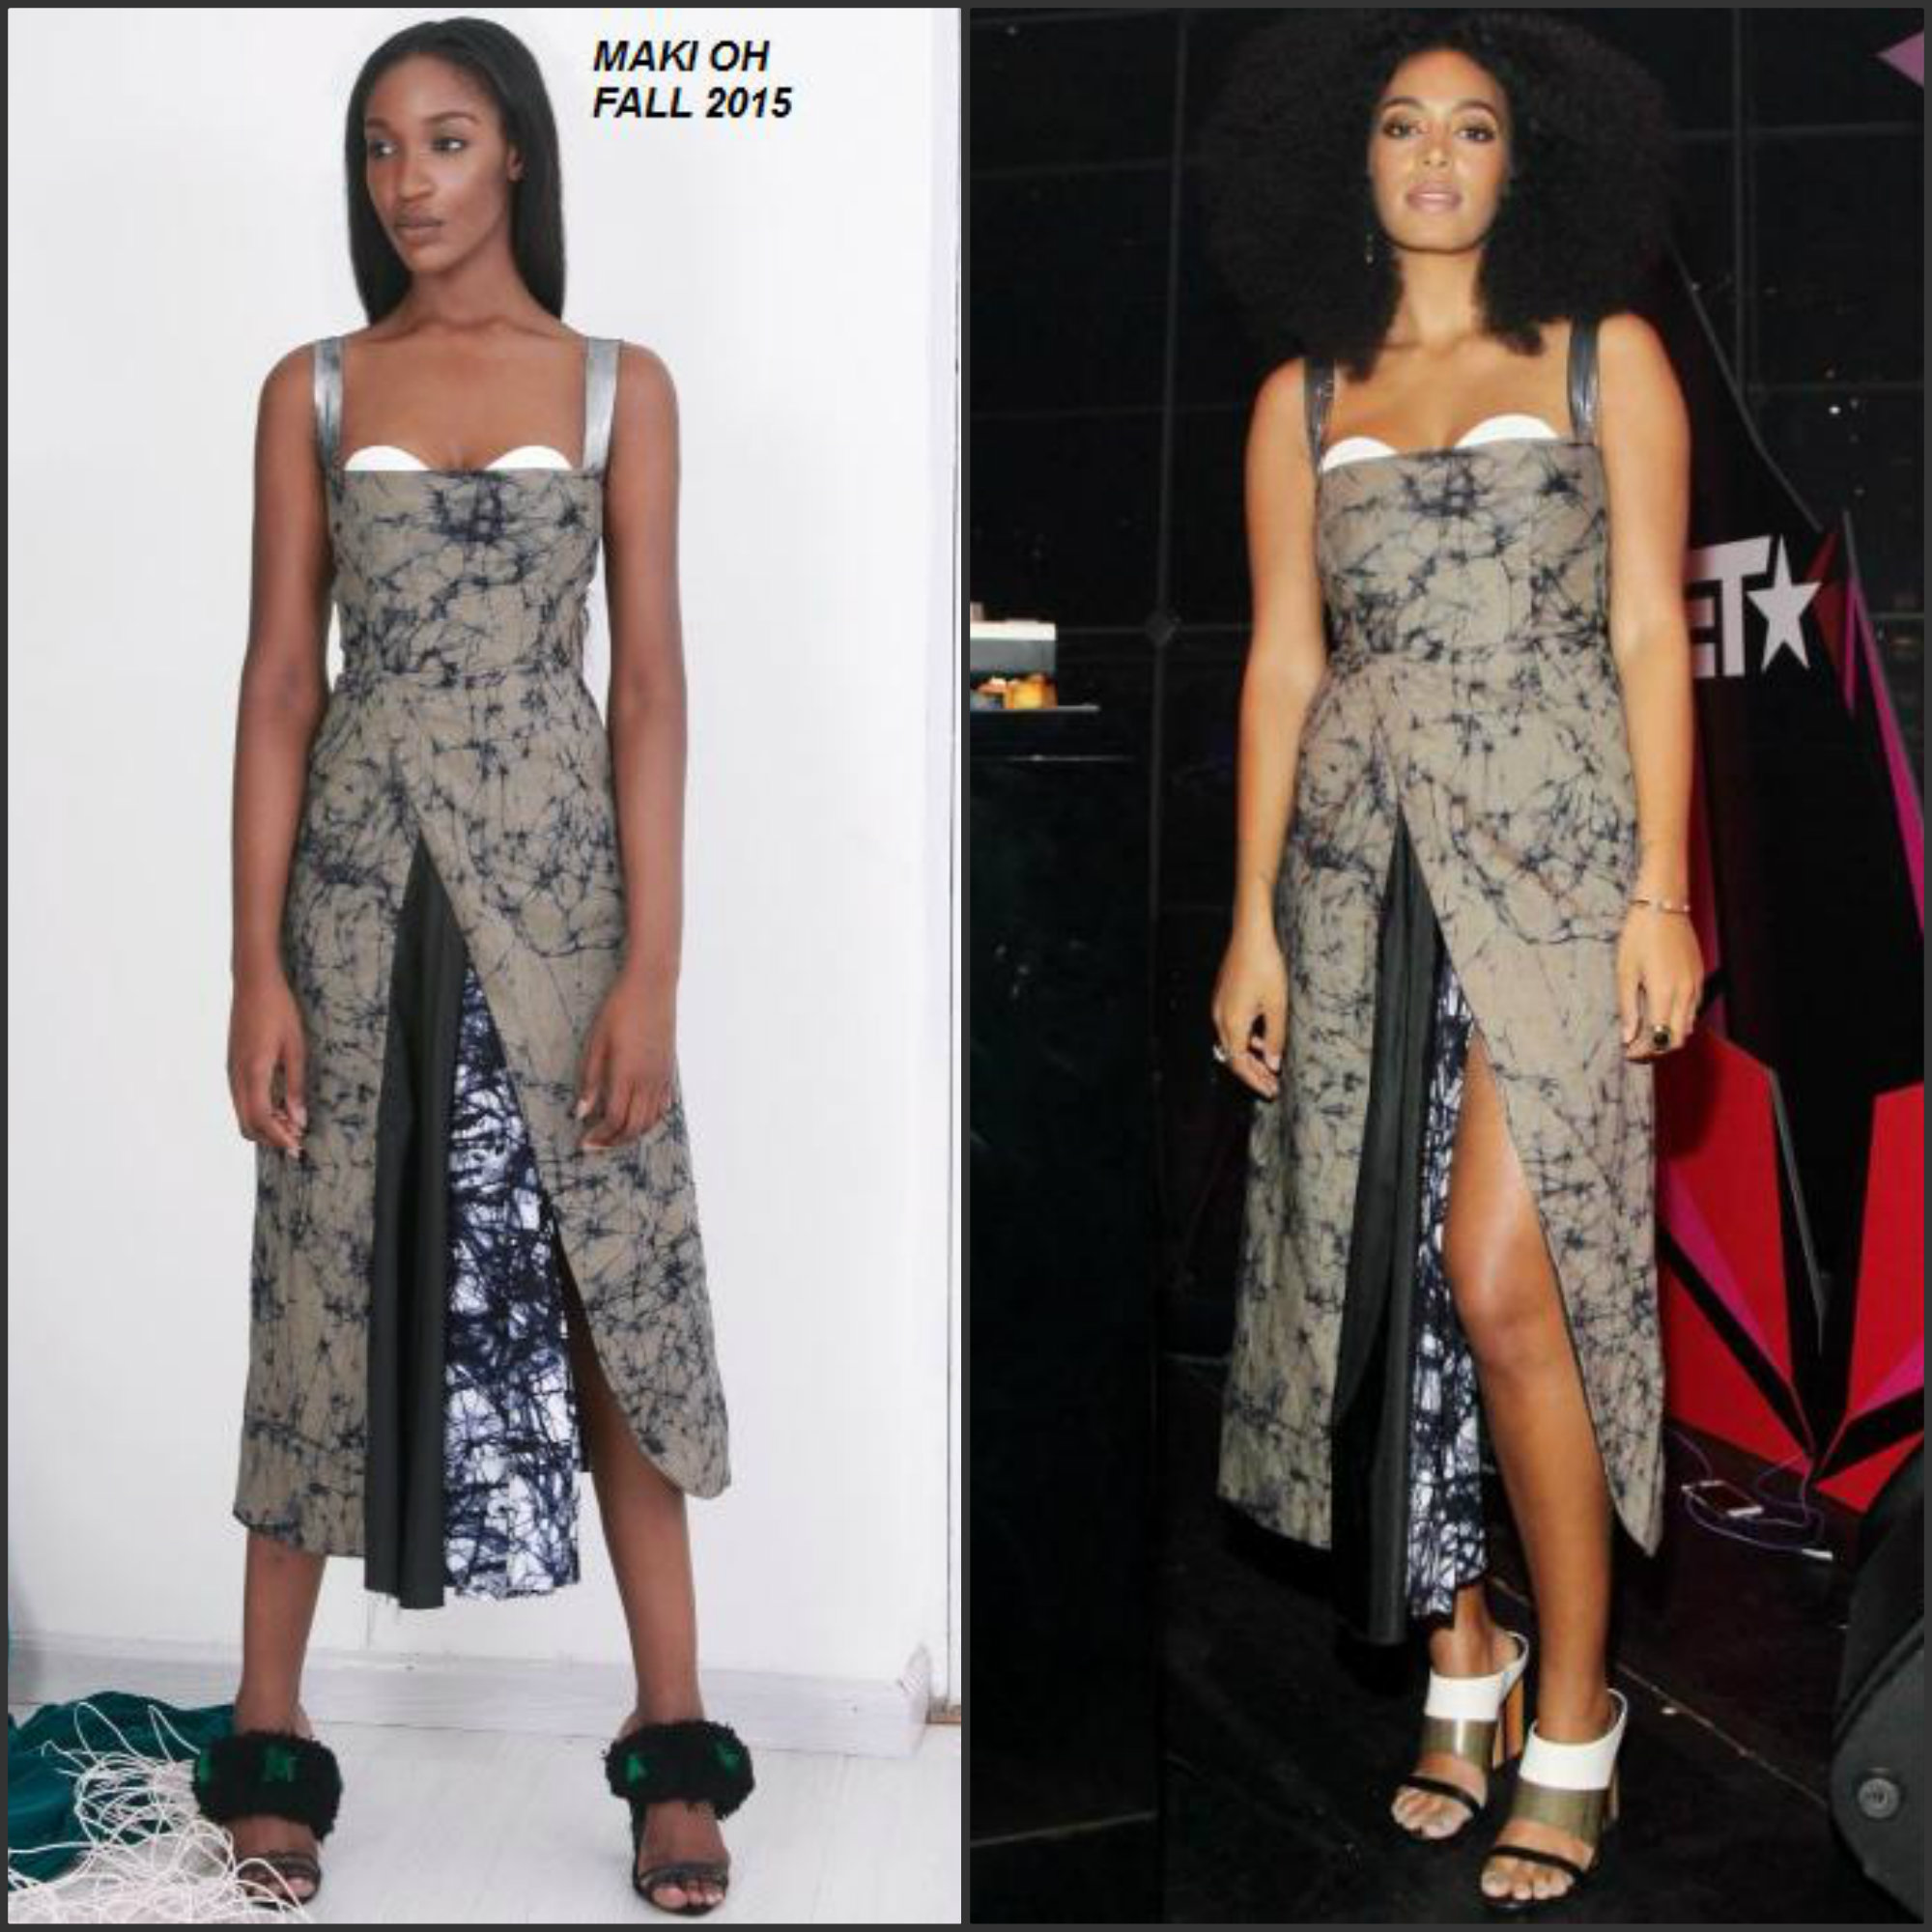 Solange-Knowles-in-Maki-Oh-at-the-2015-BET-Upfronts